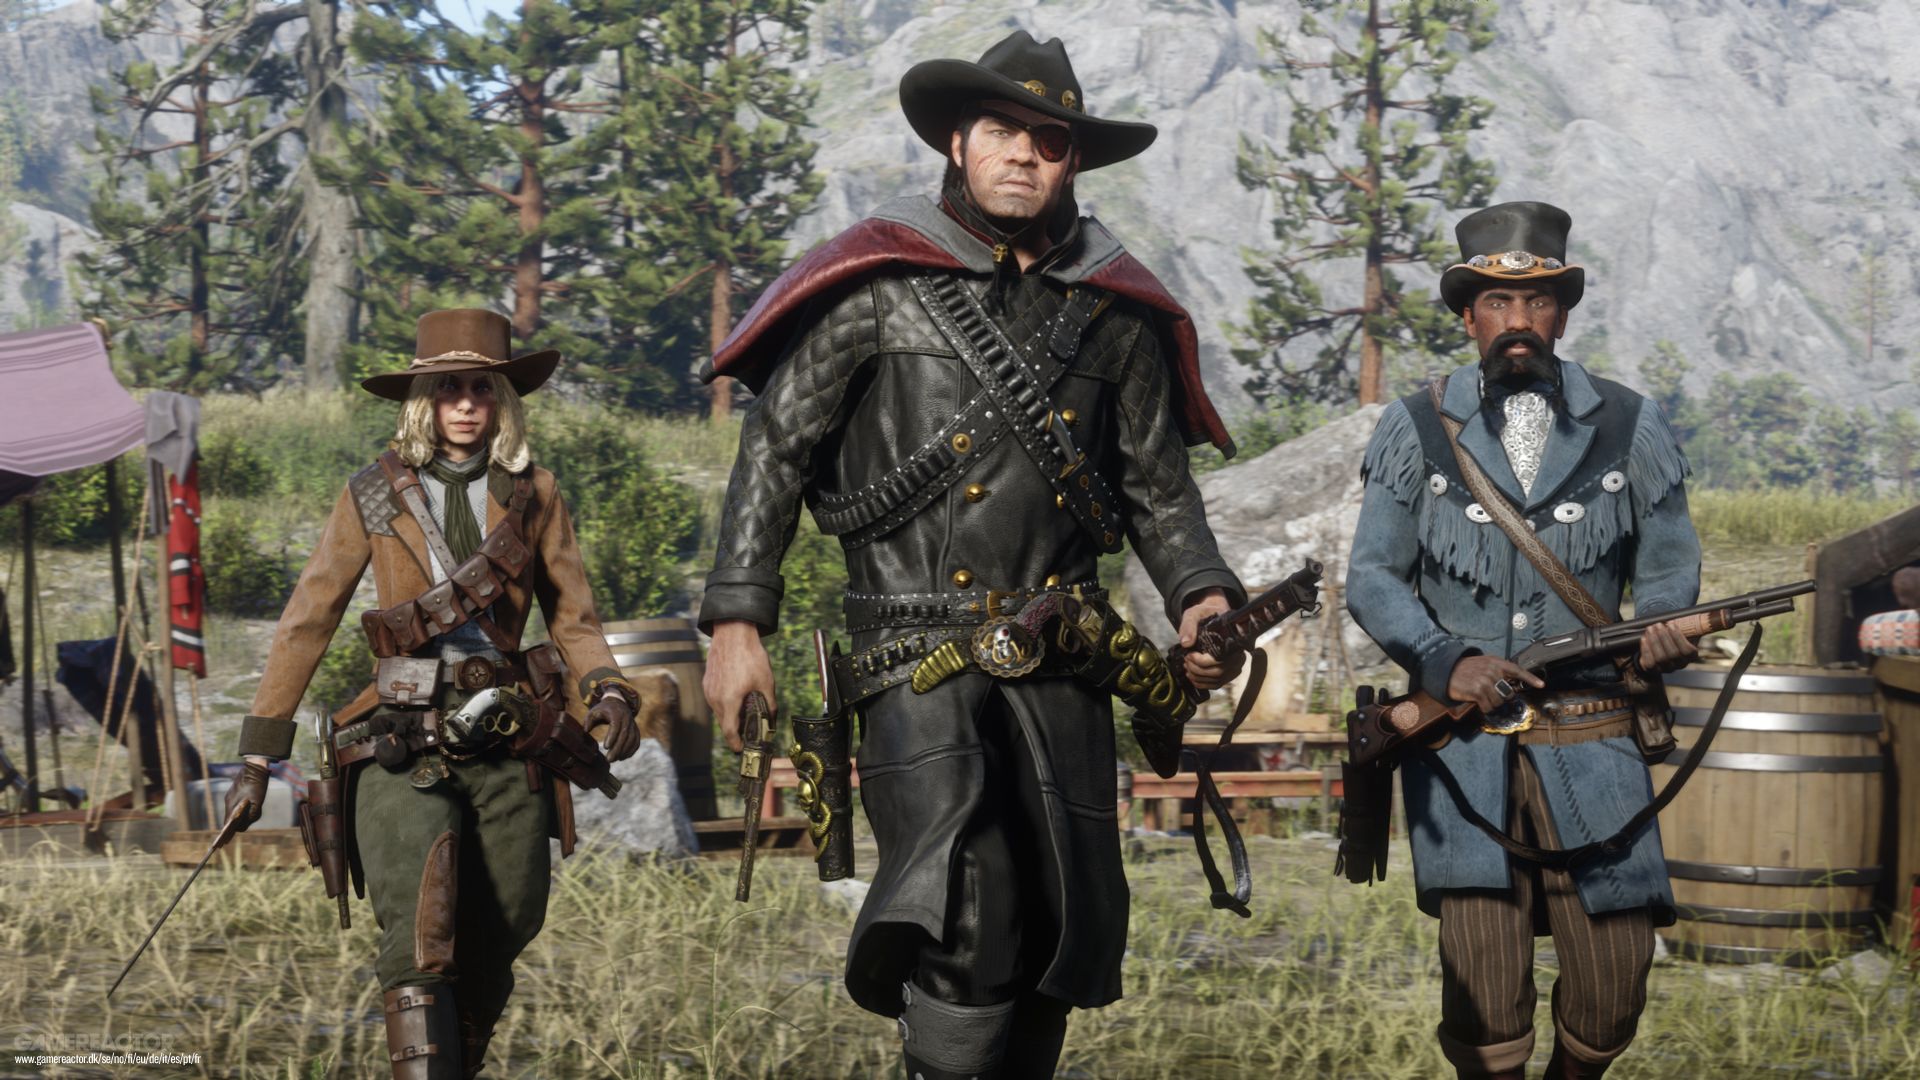 Is Red Dead Redemption 2 Coming to Switch? Recent Reports Add Confusion.